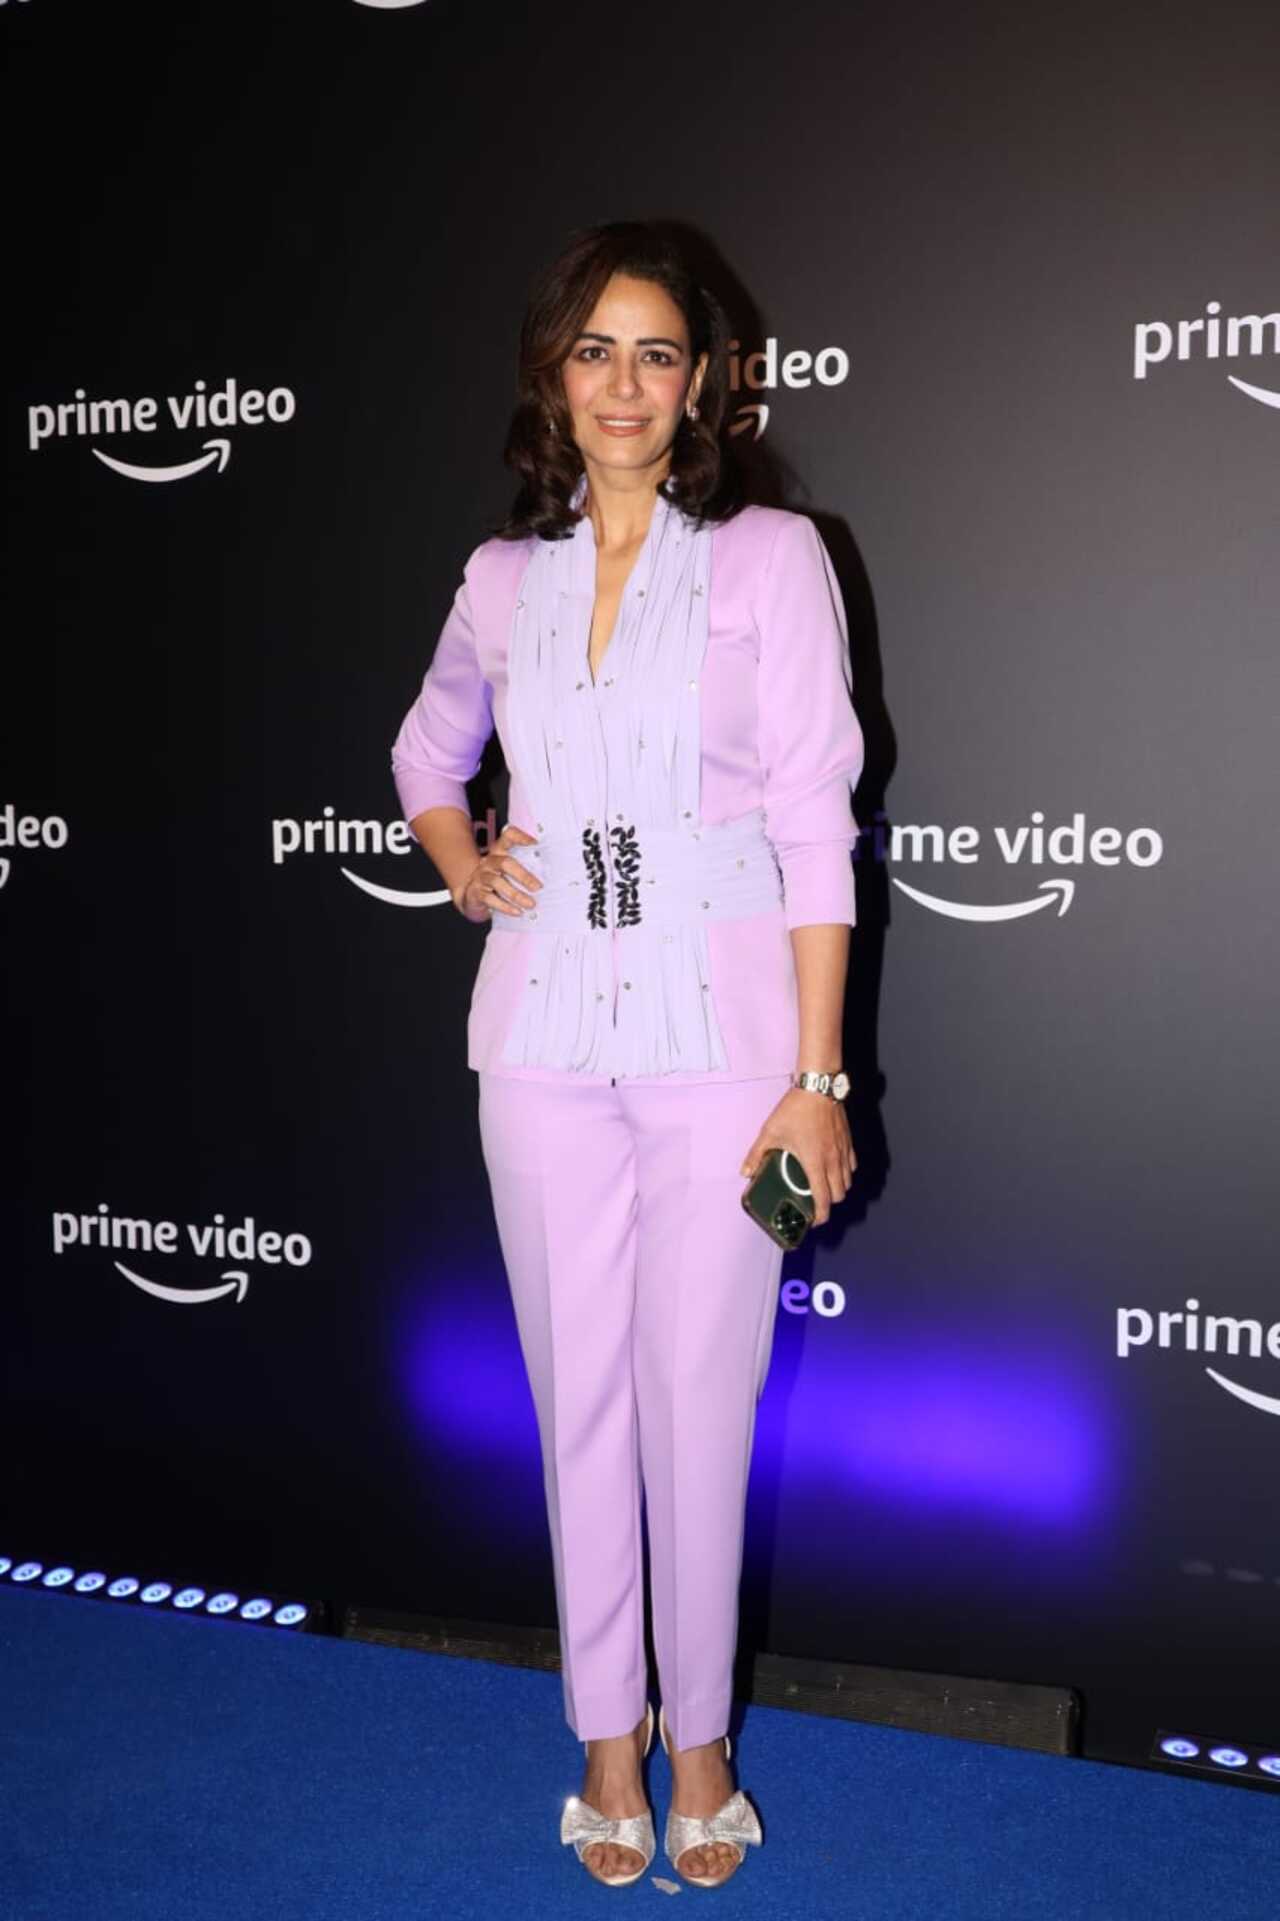 Mona Singh, who wowed the audience with her performance in 'Made in Heaven' season 2, dazzled in a lilac power suit. 